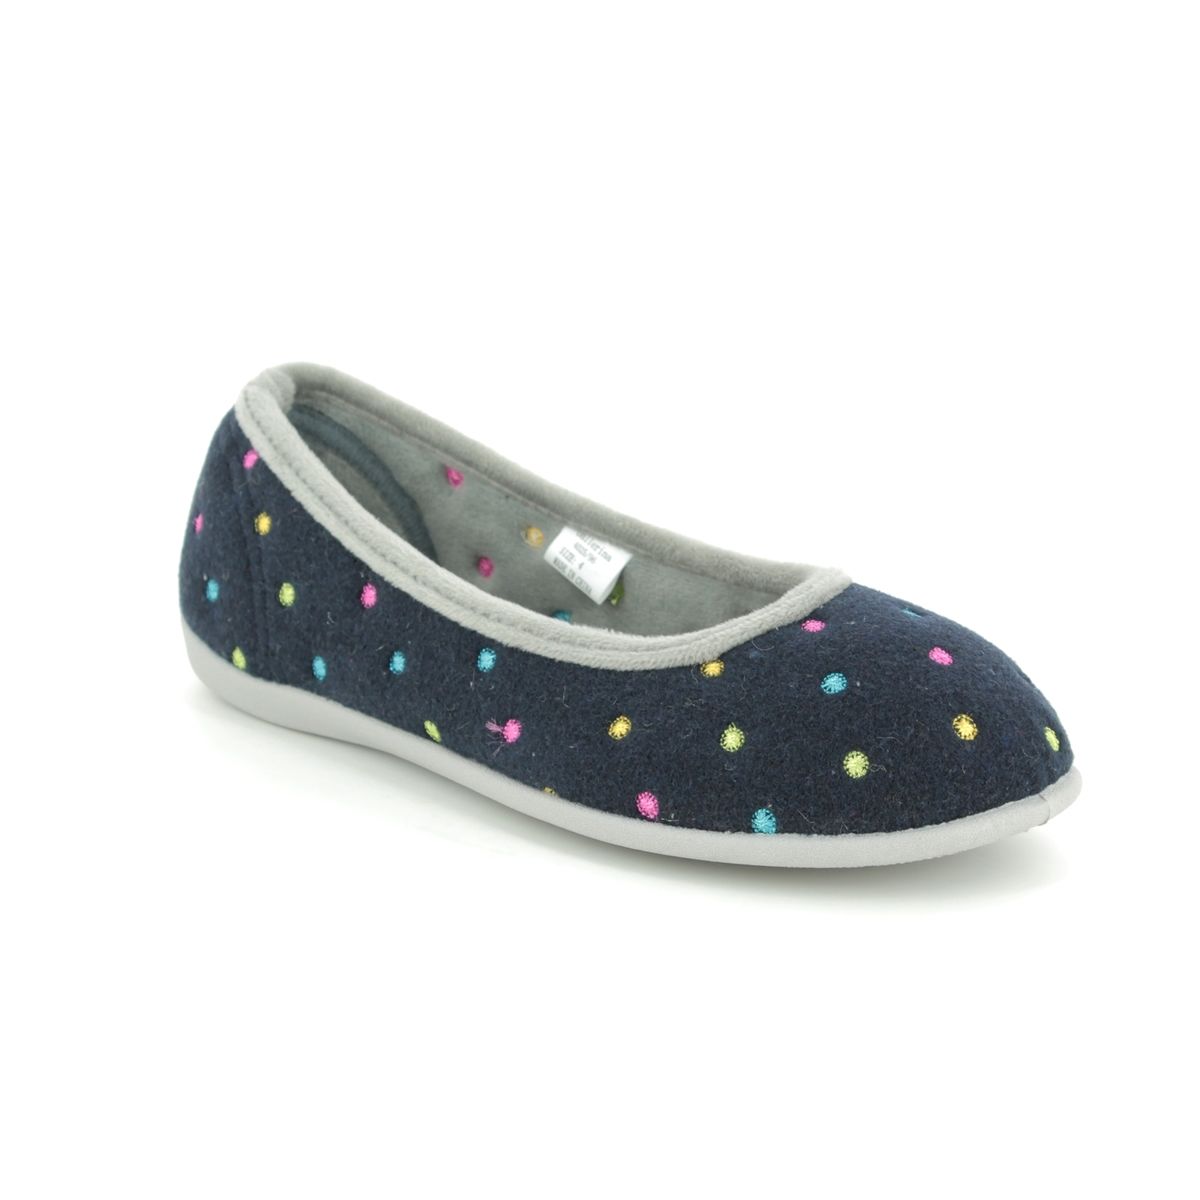 Padders Ballerina E Fit Navy Womens slippers 4025-96 in a Spotted Textile in Size 4